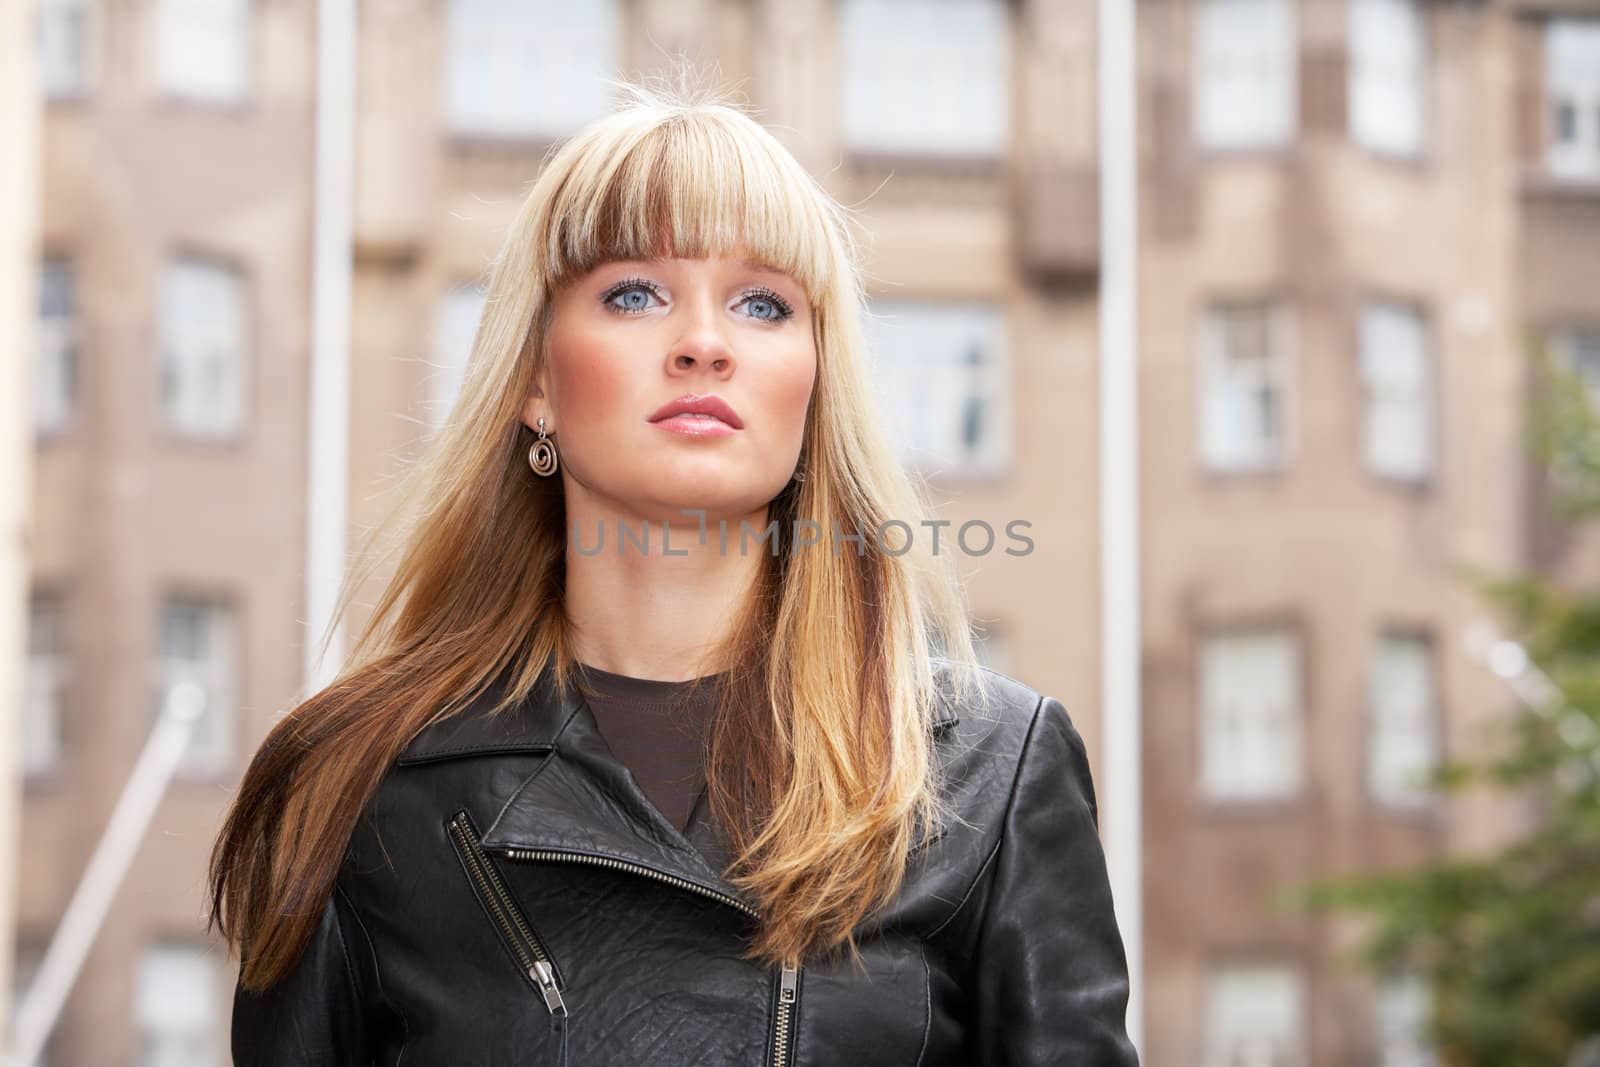 Portrait of young woman standing in city, looking away